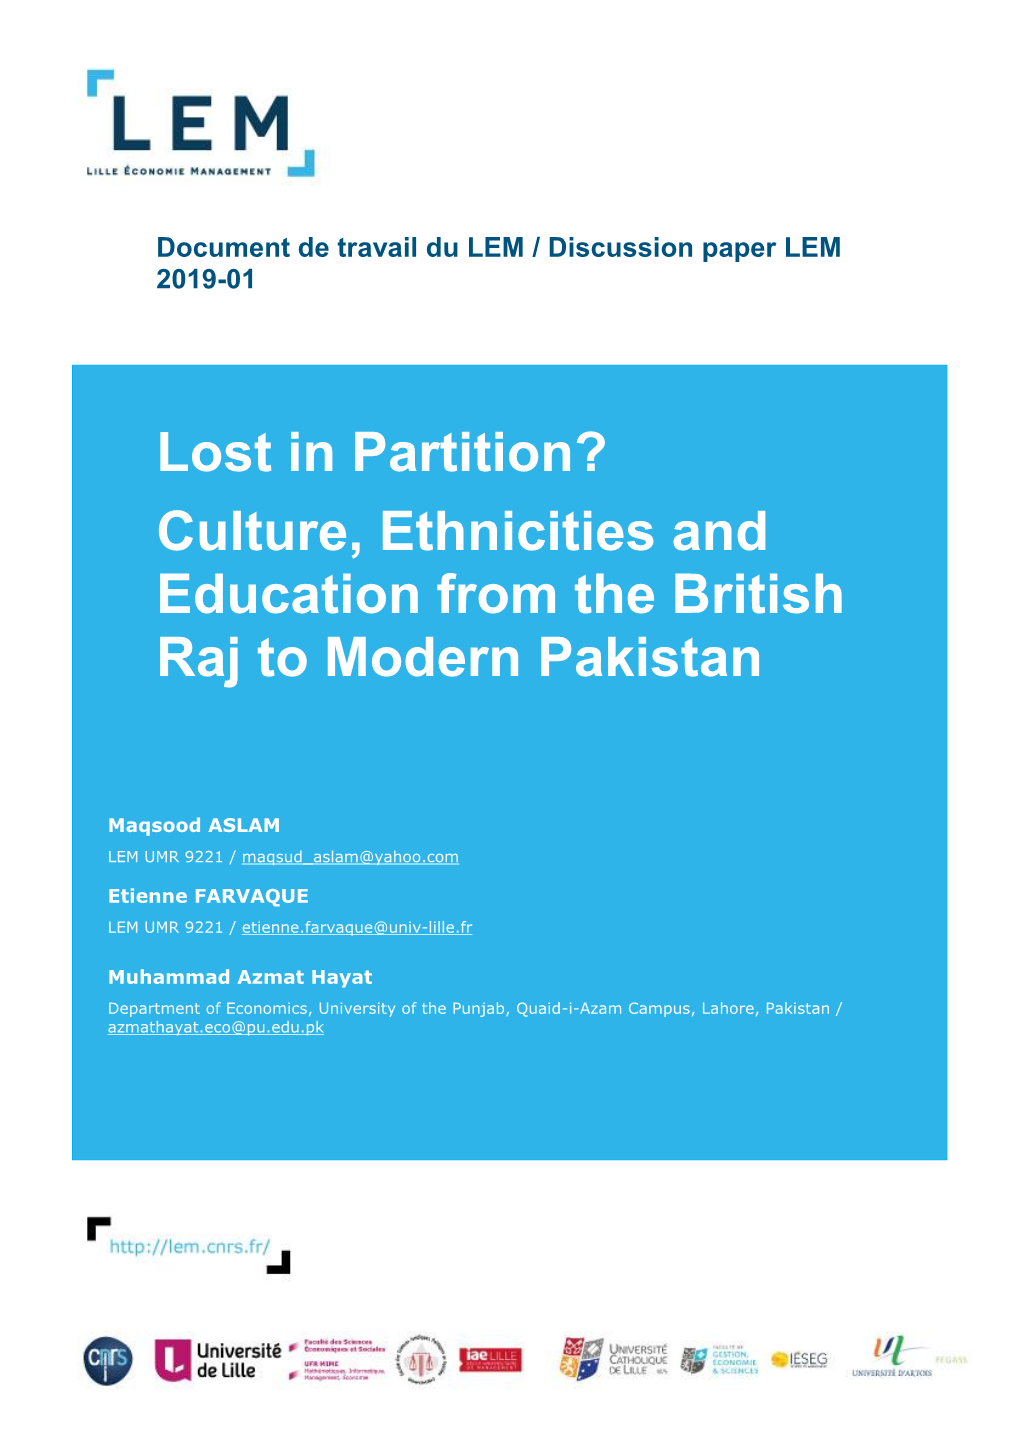 Lost in Partition? Culture, Ethnicities and Education from the British Raj to Modern Pakistan